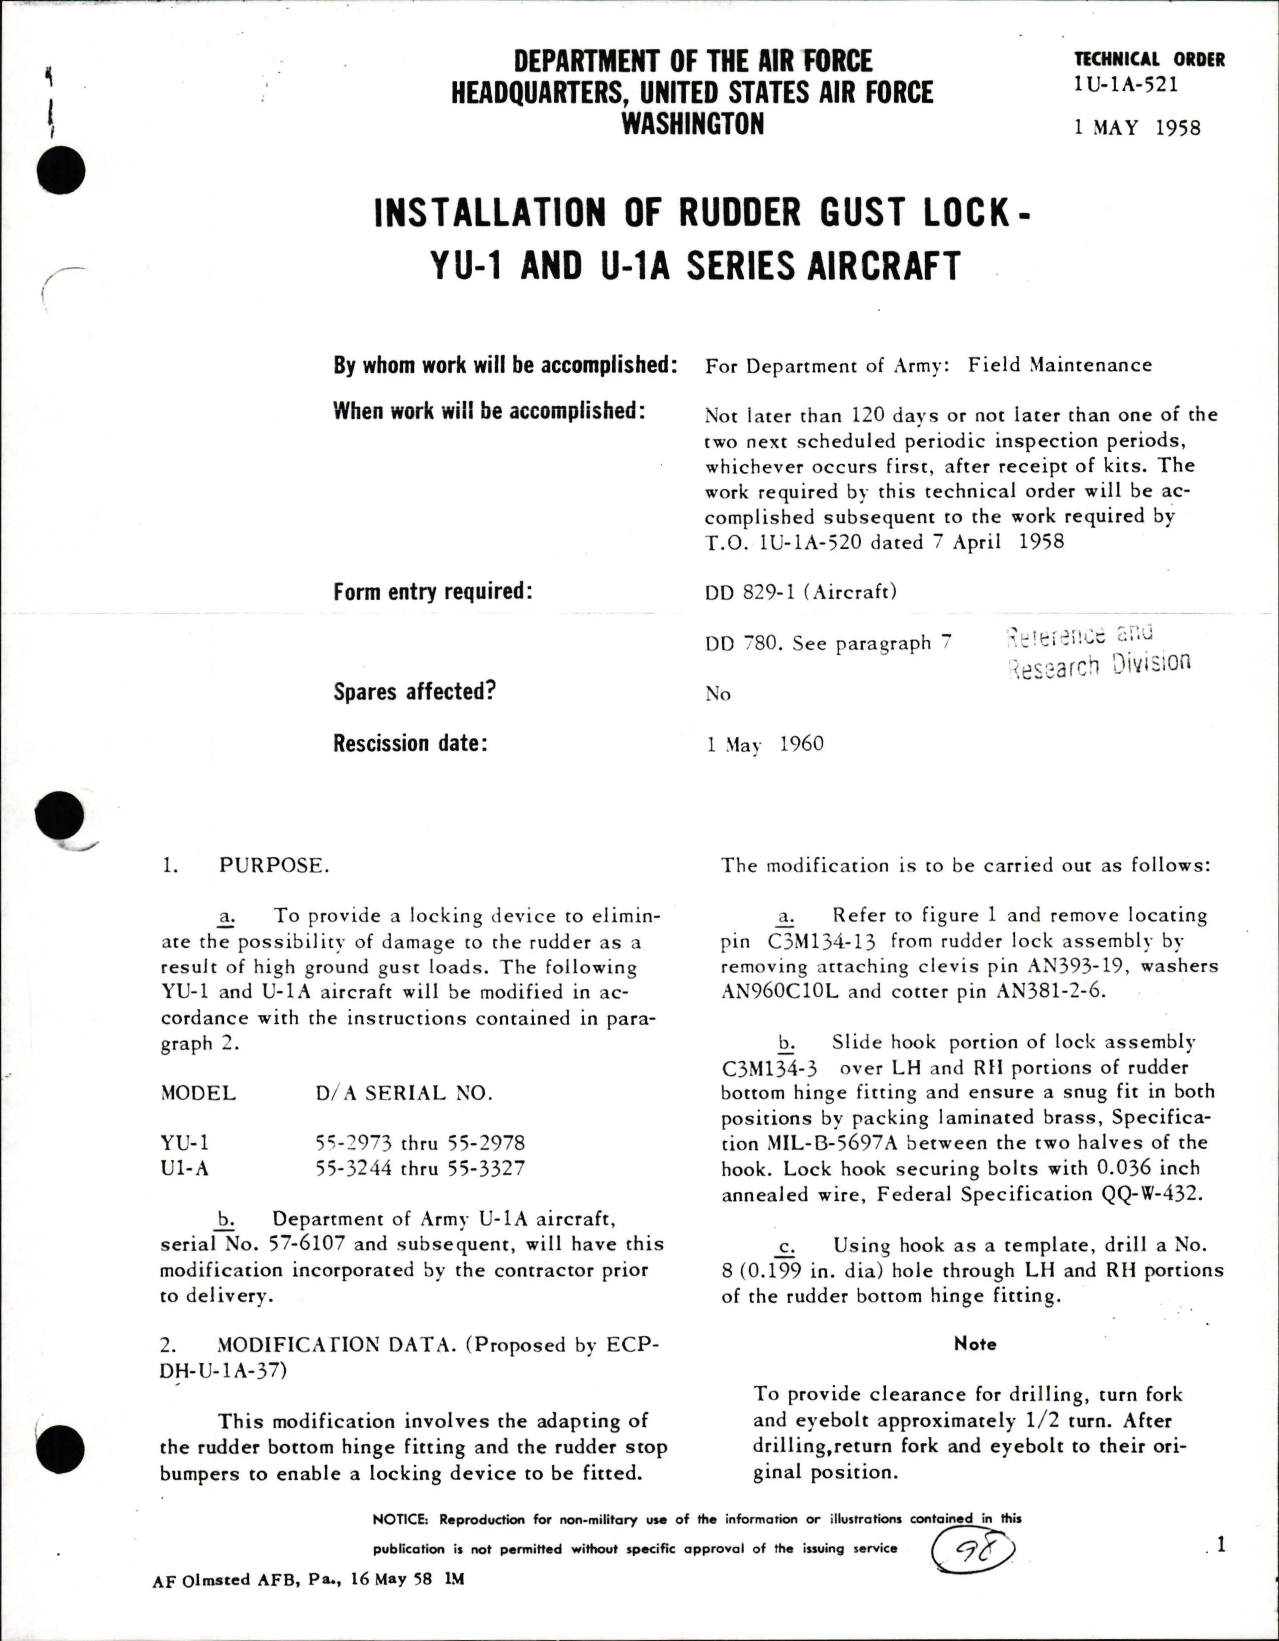 Sample page 1 from AirCorps Library document: Installation of Rudder Gust Lock on YU-1 and U-1A